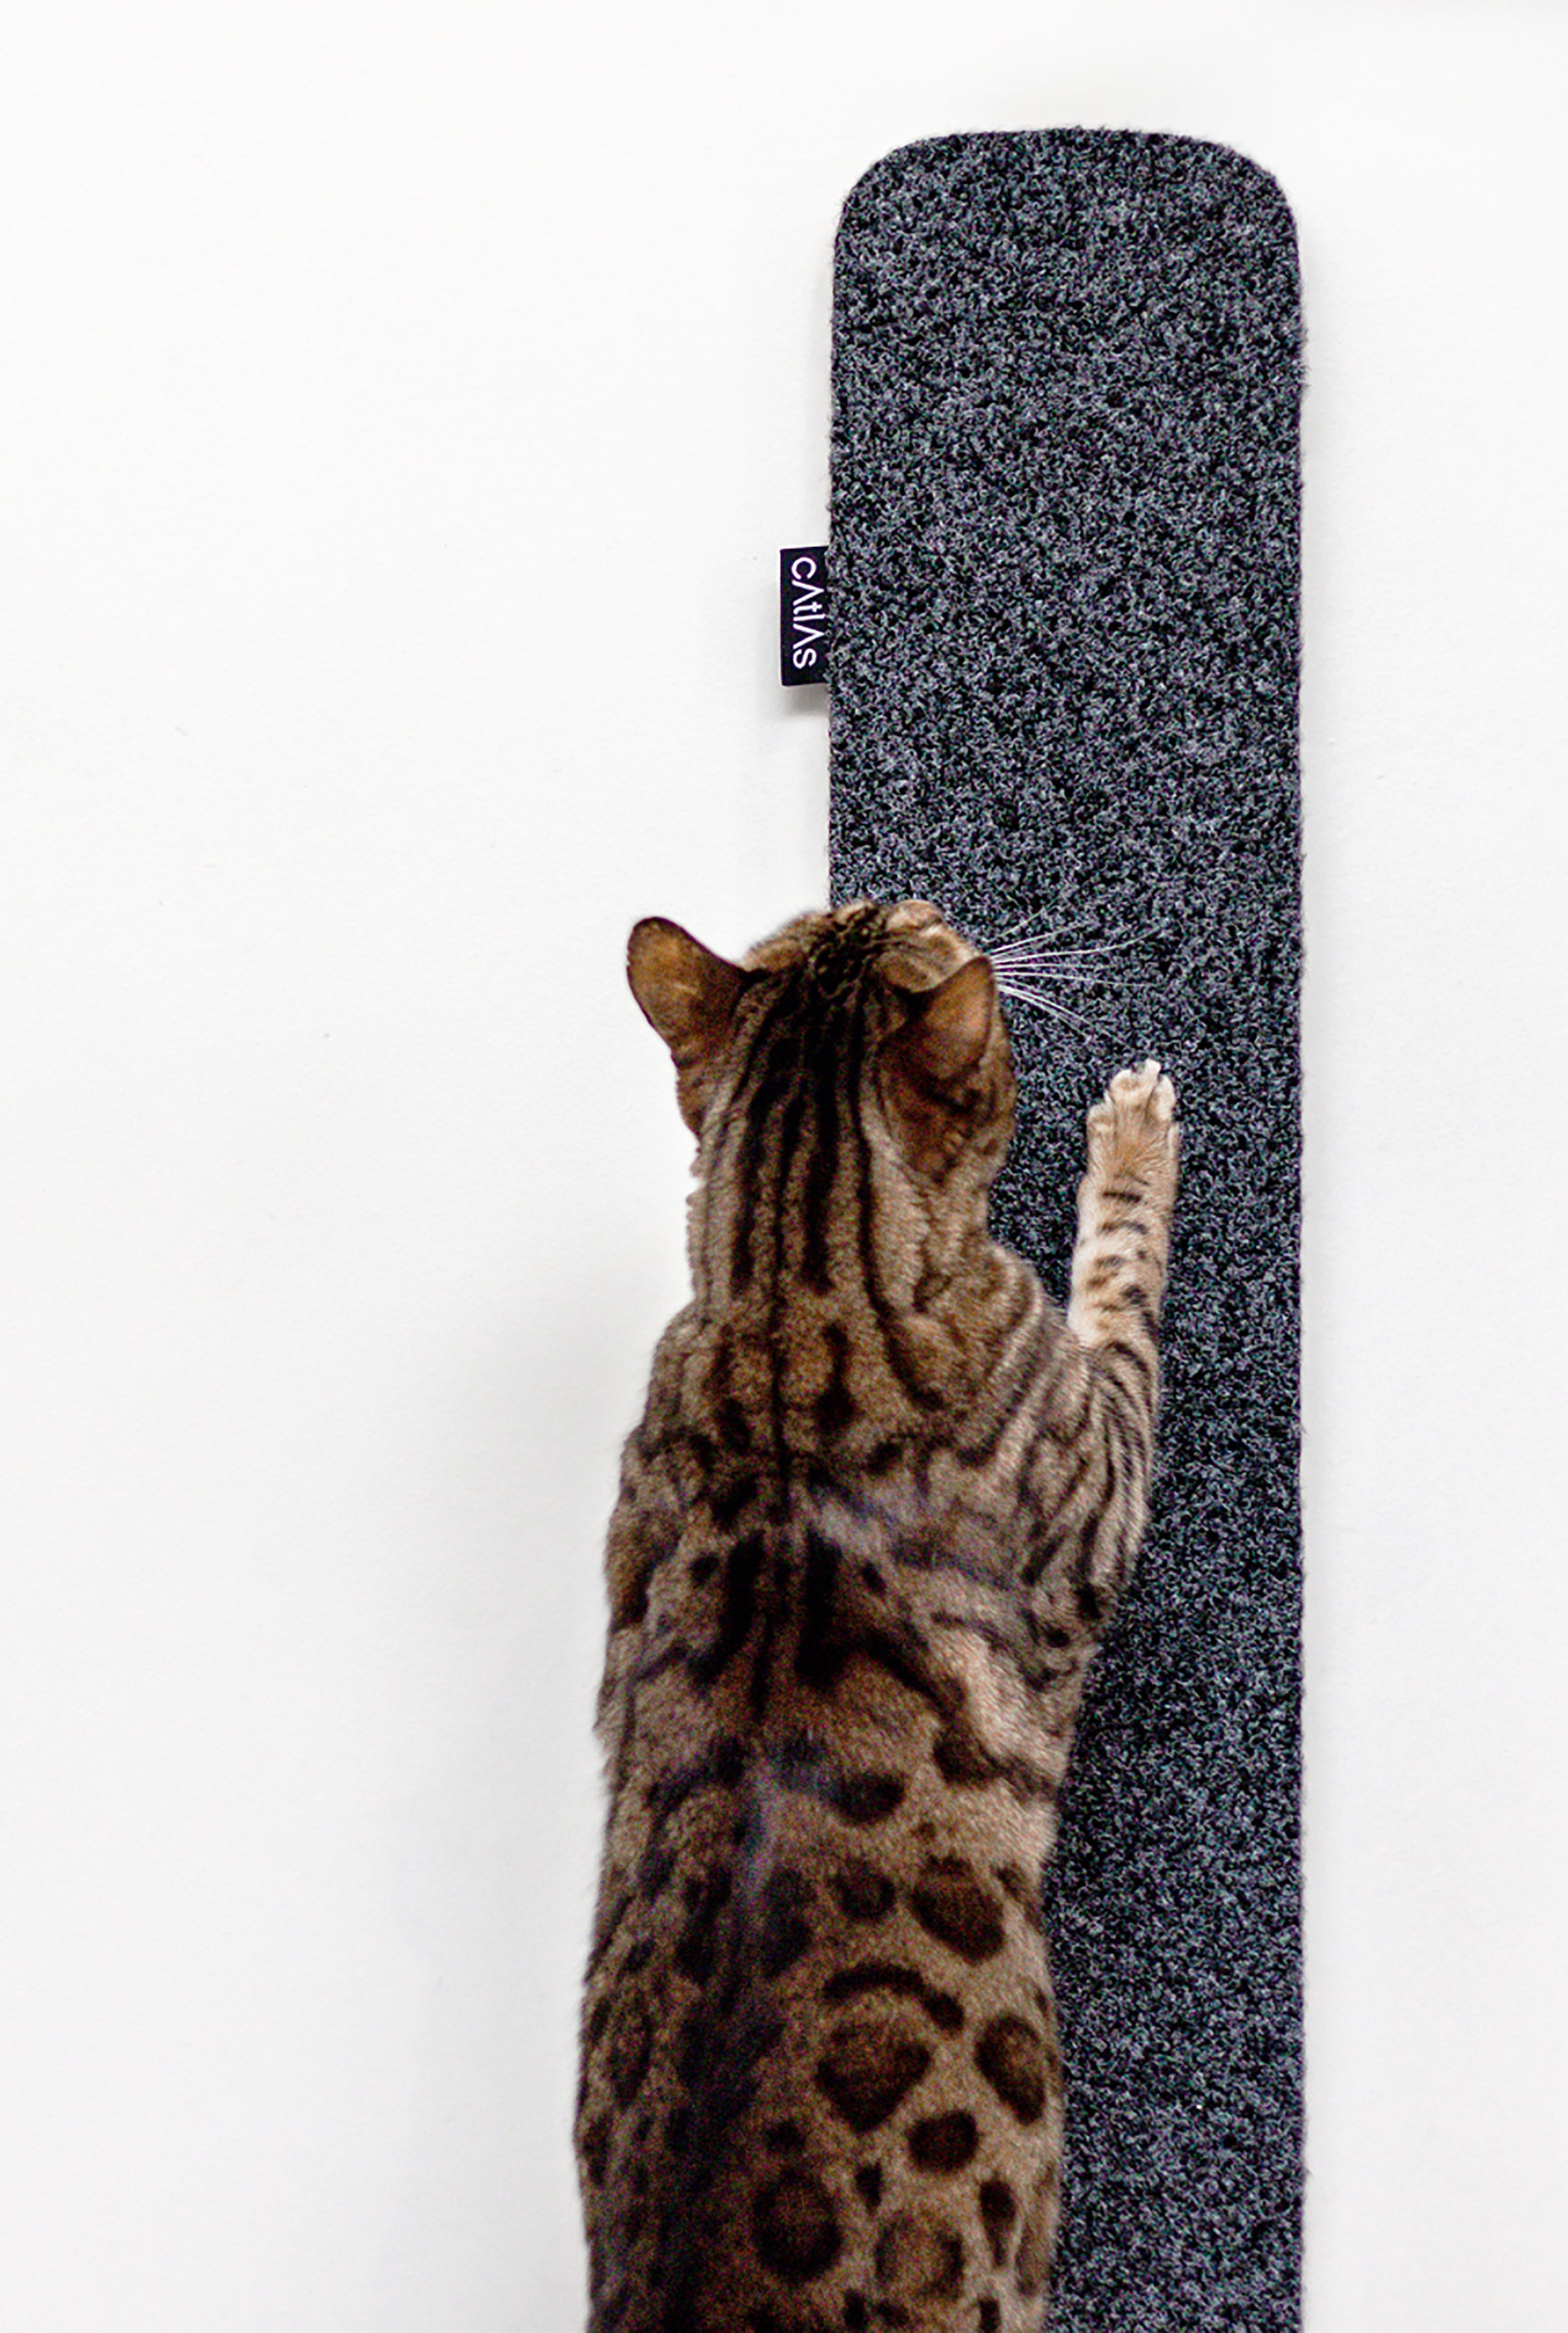 Catlas Wall Mounted Scratching Pad